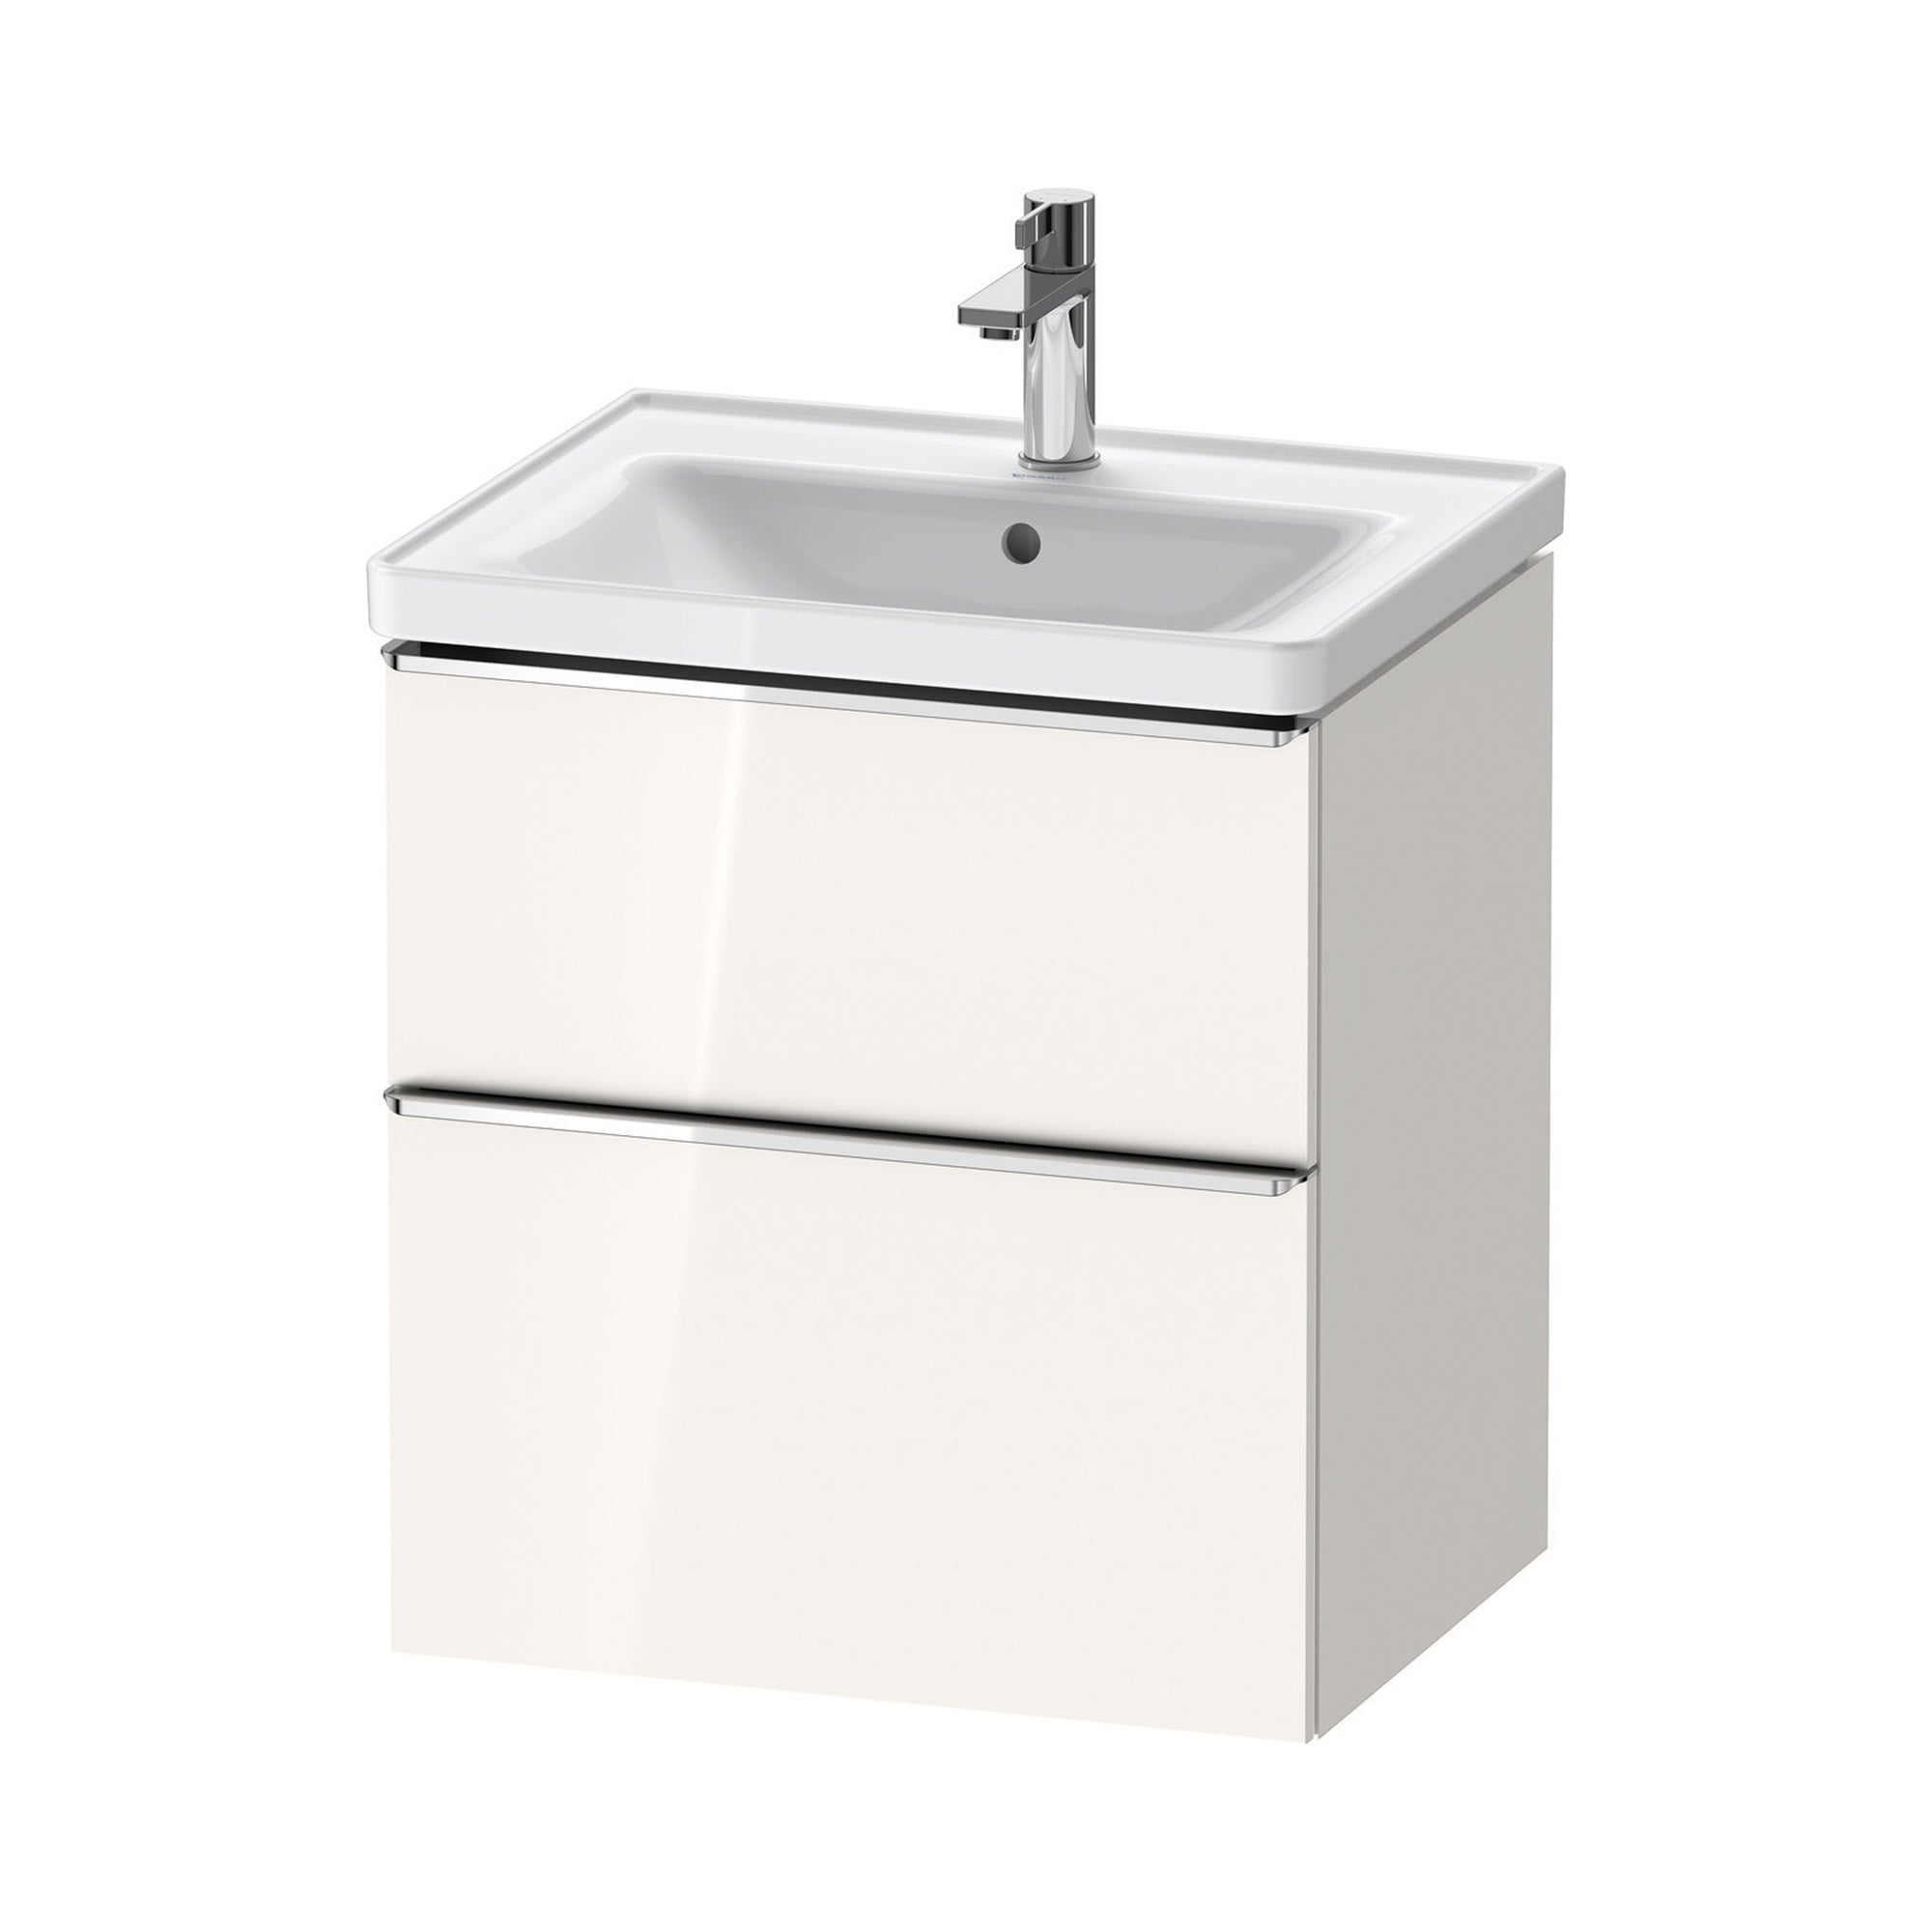 duravit d-neo 600 wall mounted vanity unit with d-neo basin gloss white chrome handles